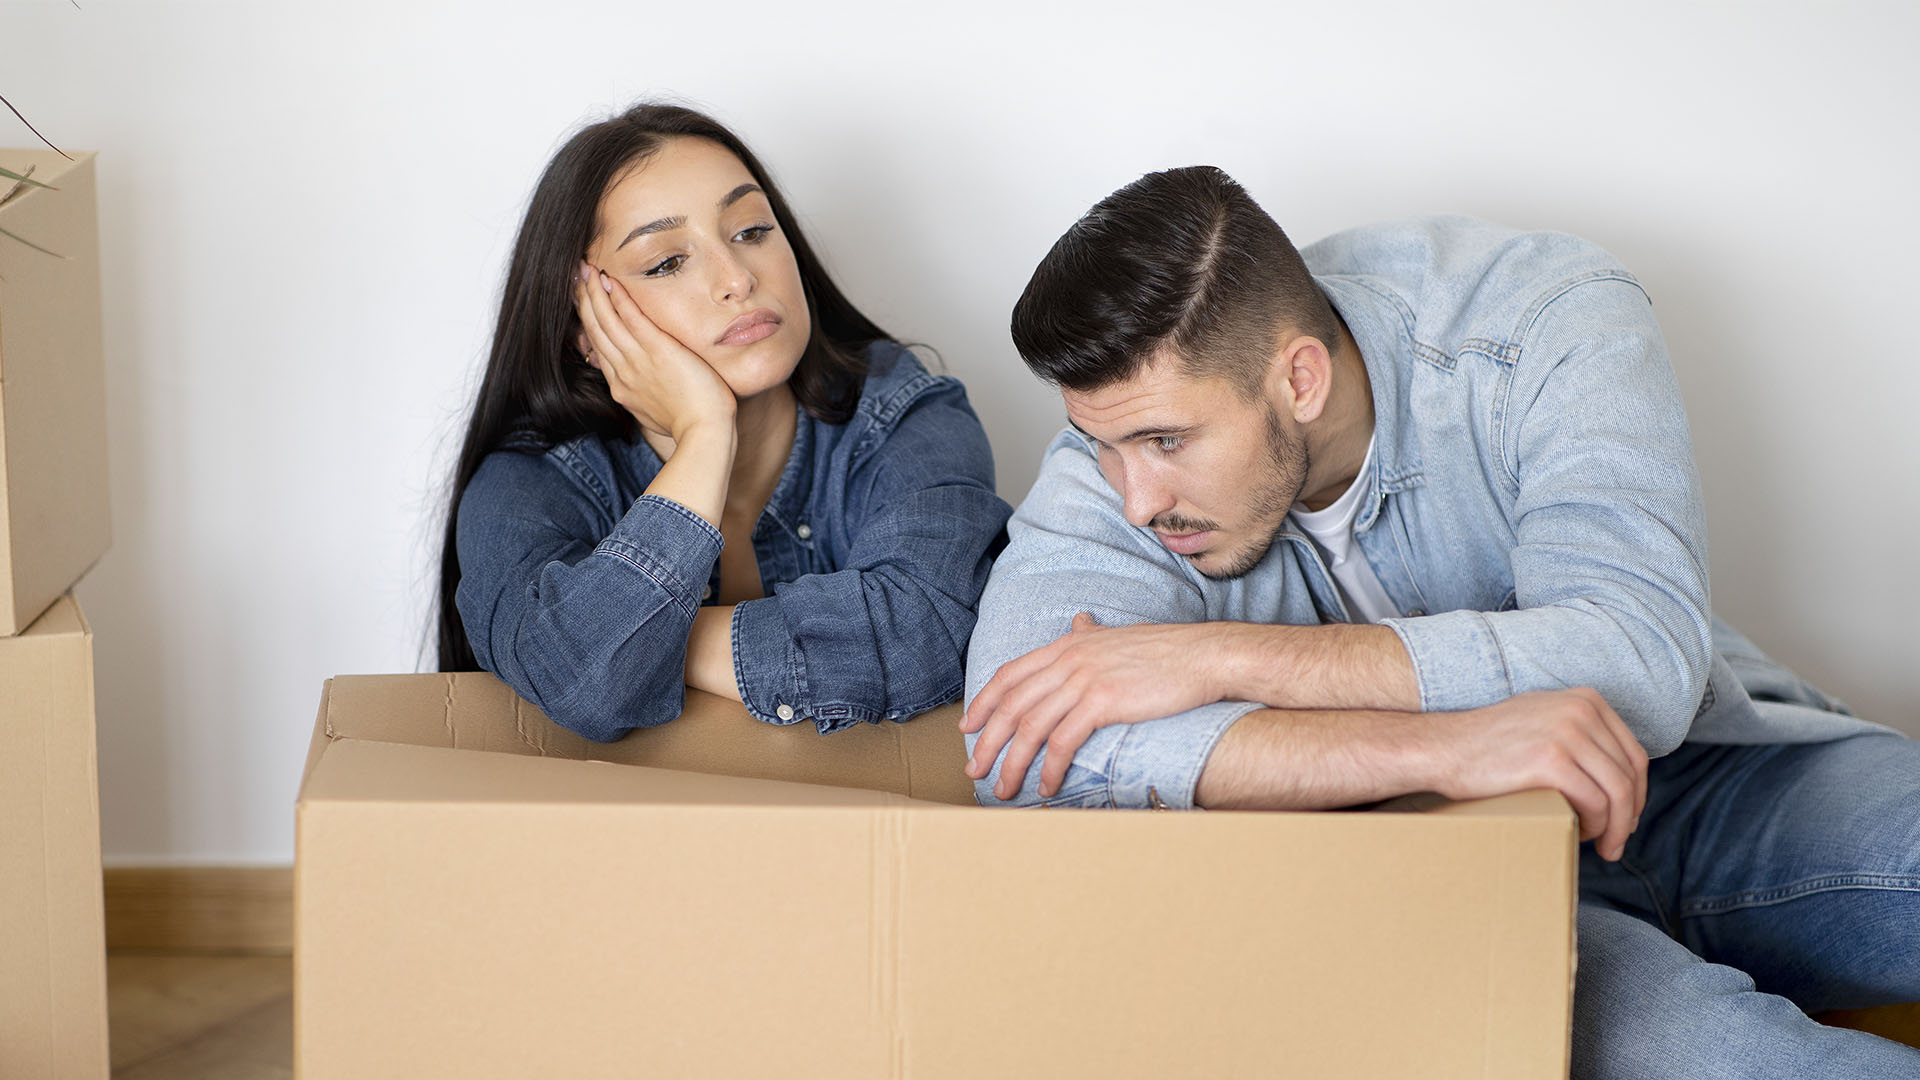 A woman and a man sit on the floor looking tired and contemplative, surrounded by cardboard boxes, pondering if renting is ruining their future.